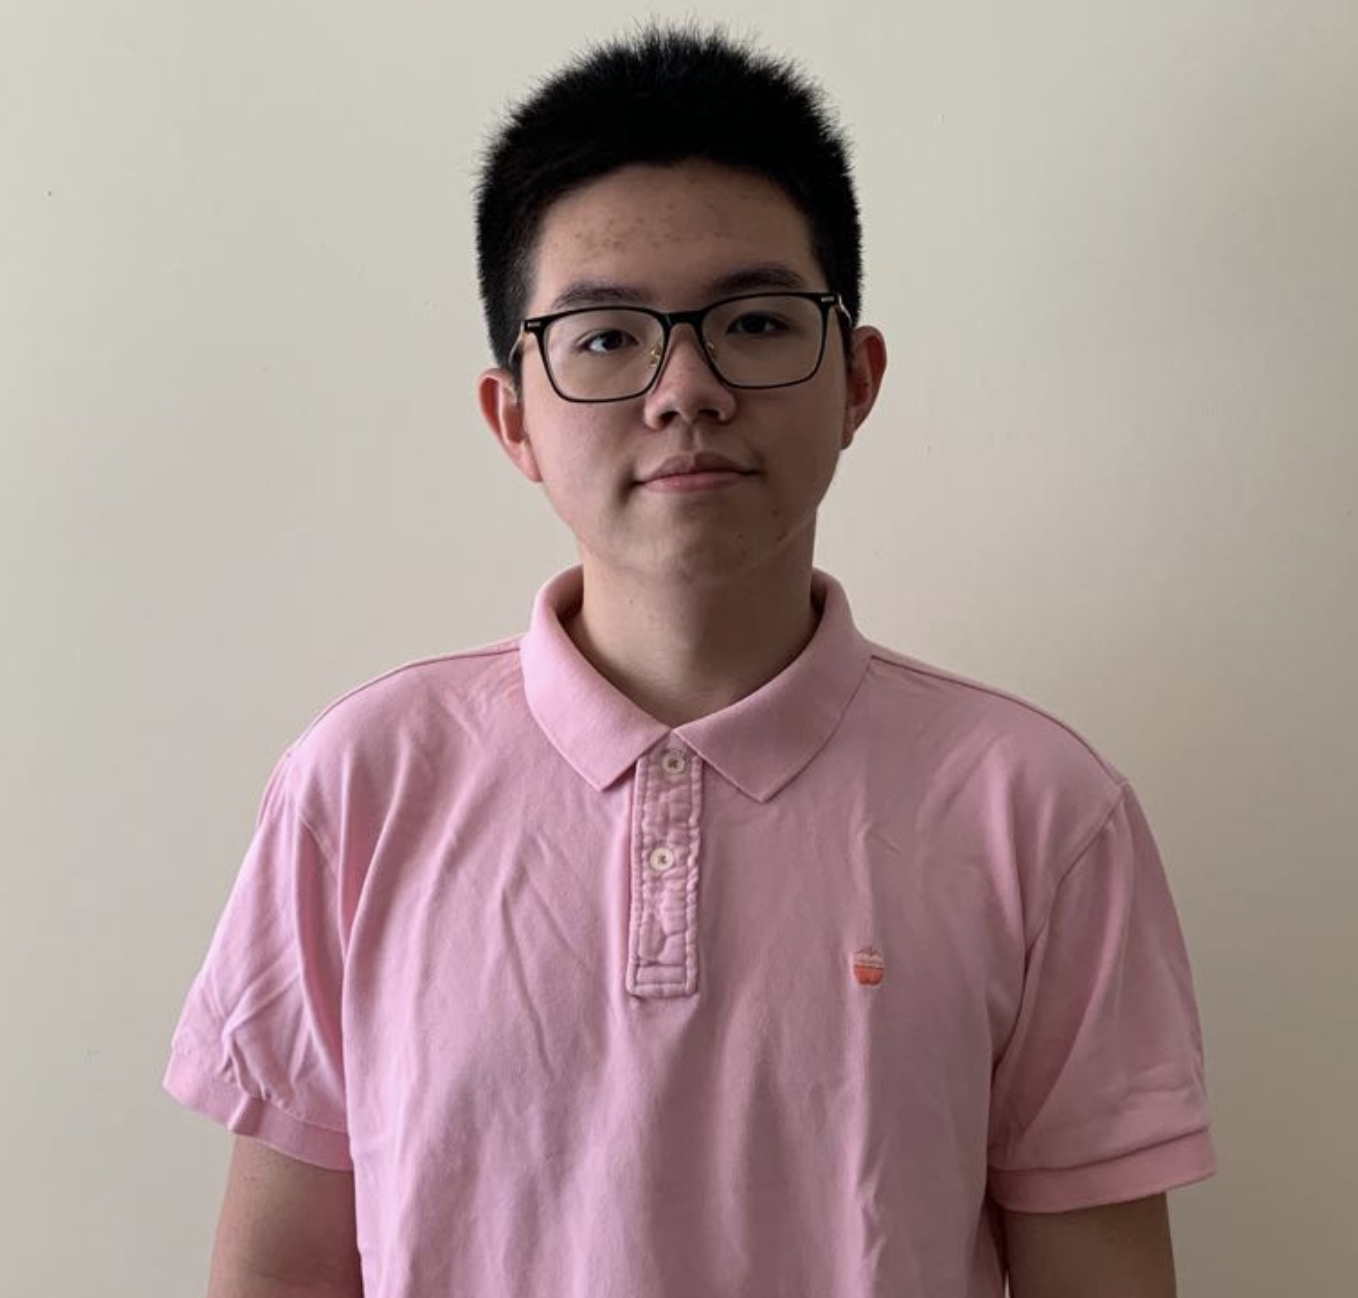 Portrait of young man with short black hair, glasses, and pink polo shirt.